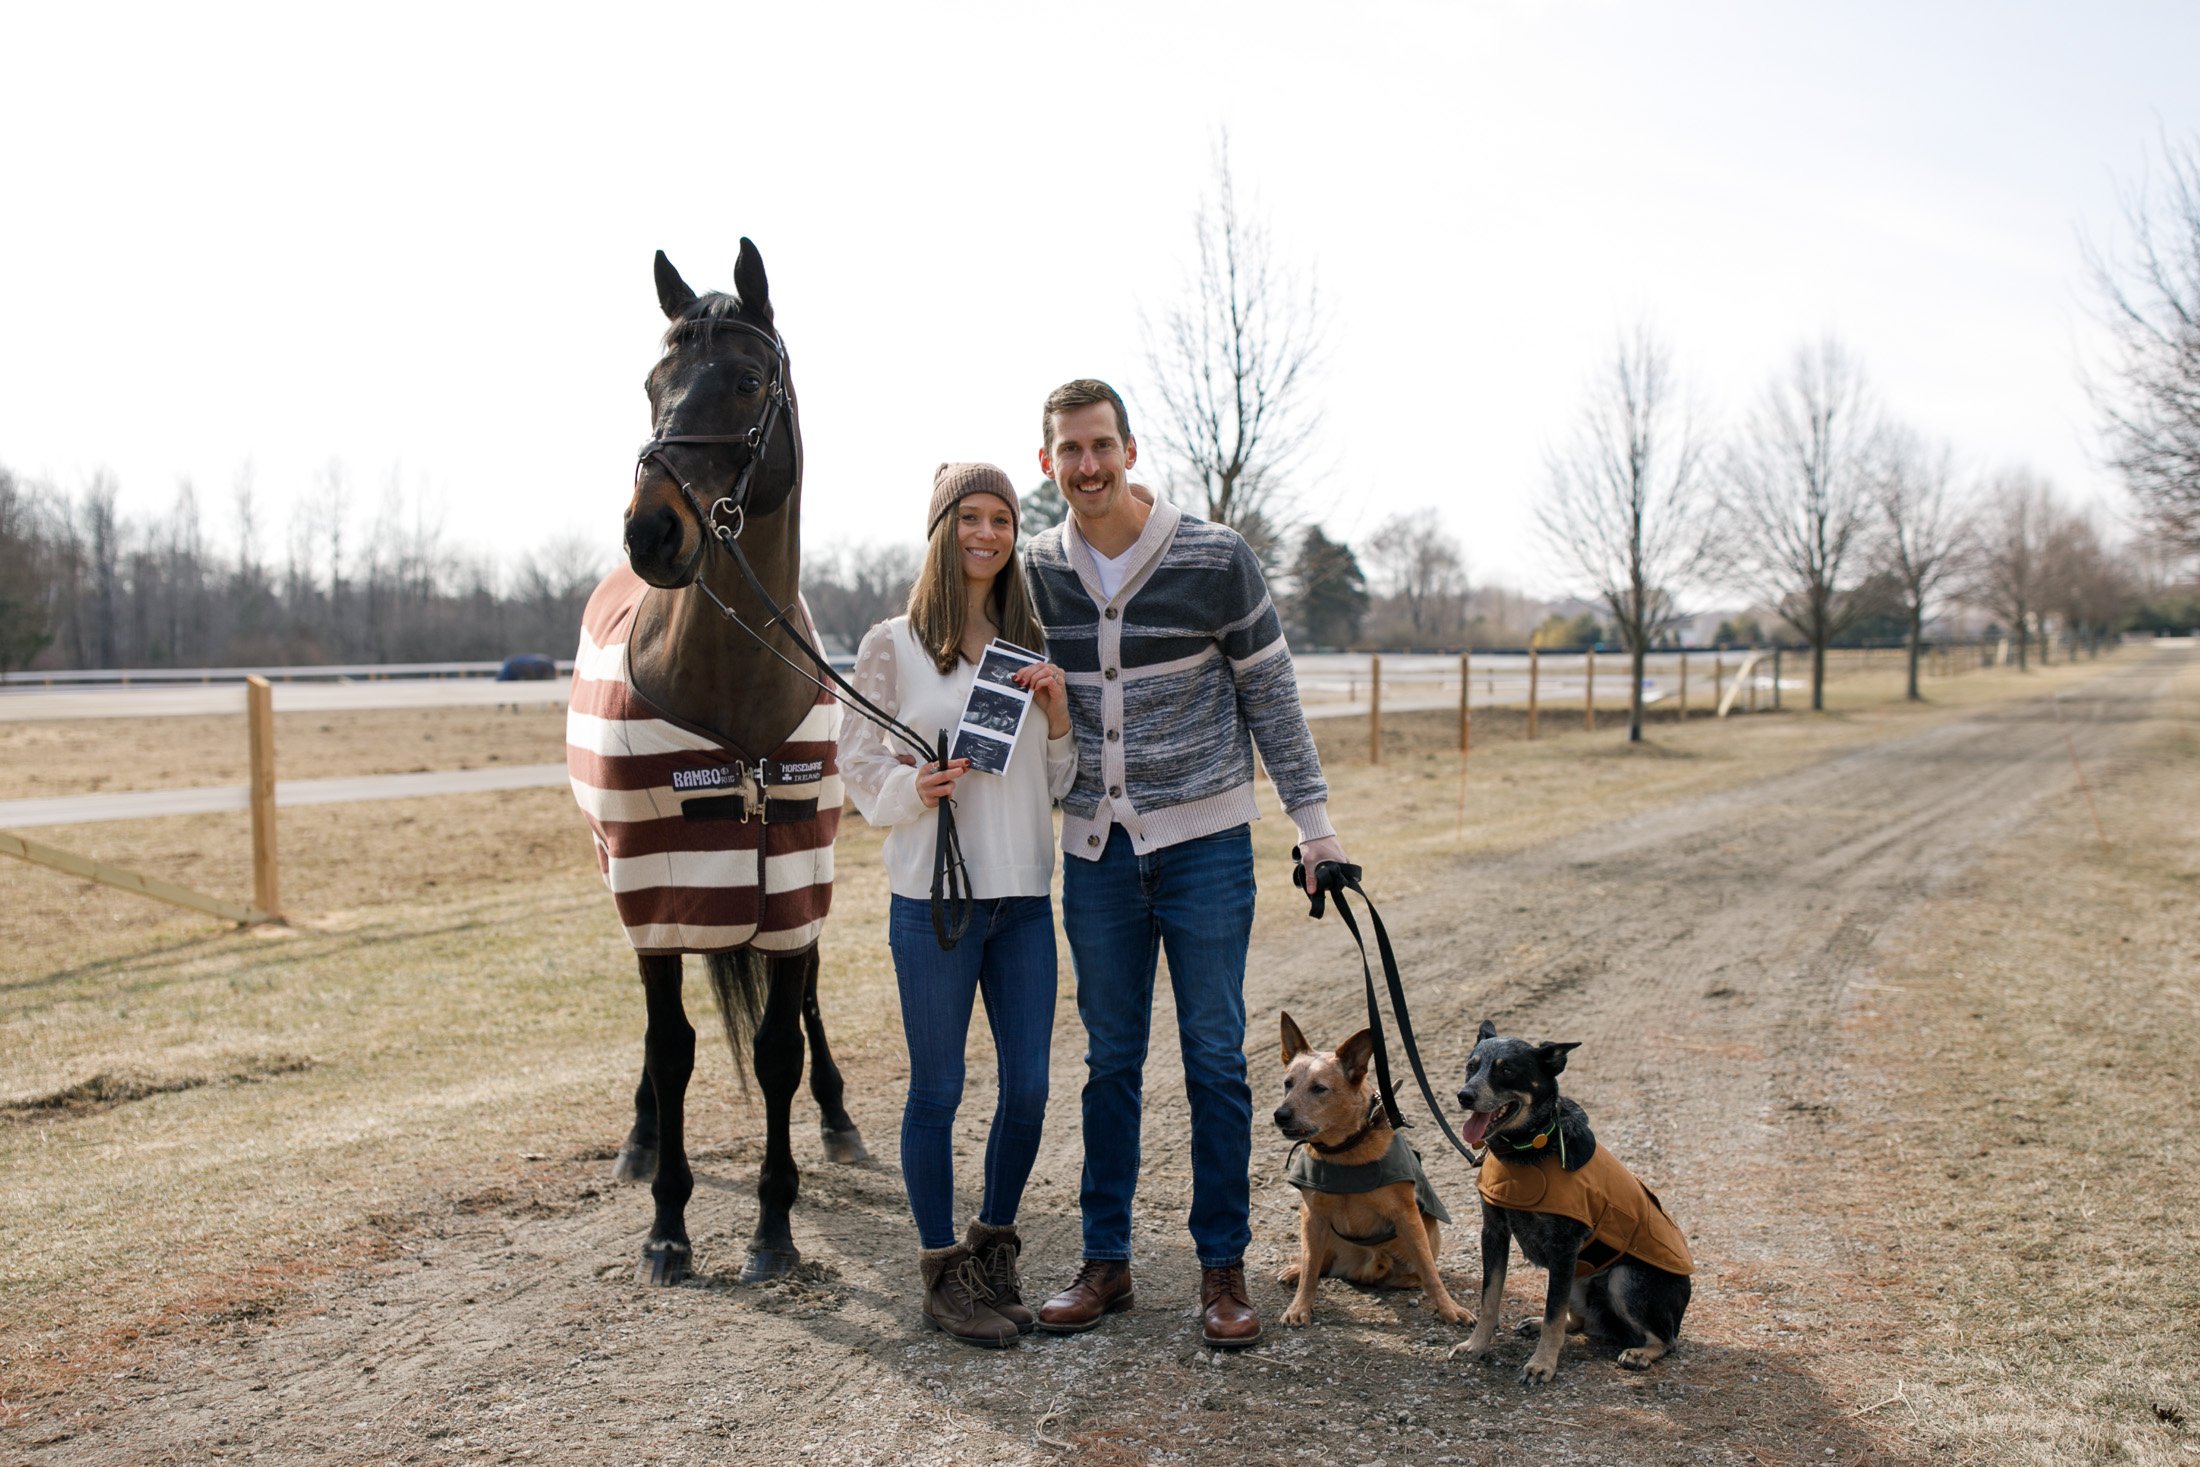 George and Kelsey Pregnancy Announcement - Grand Haven Family Photographer - Black Diamond Equestrian - Nunica Family Photogrpaher - Maternity Session - Pregnancy Announcement - Spring Lake Family Photographer - J Darling Photo_014.jpg